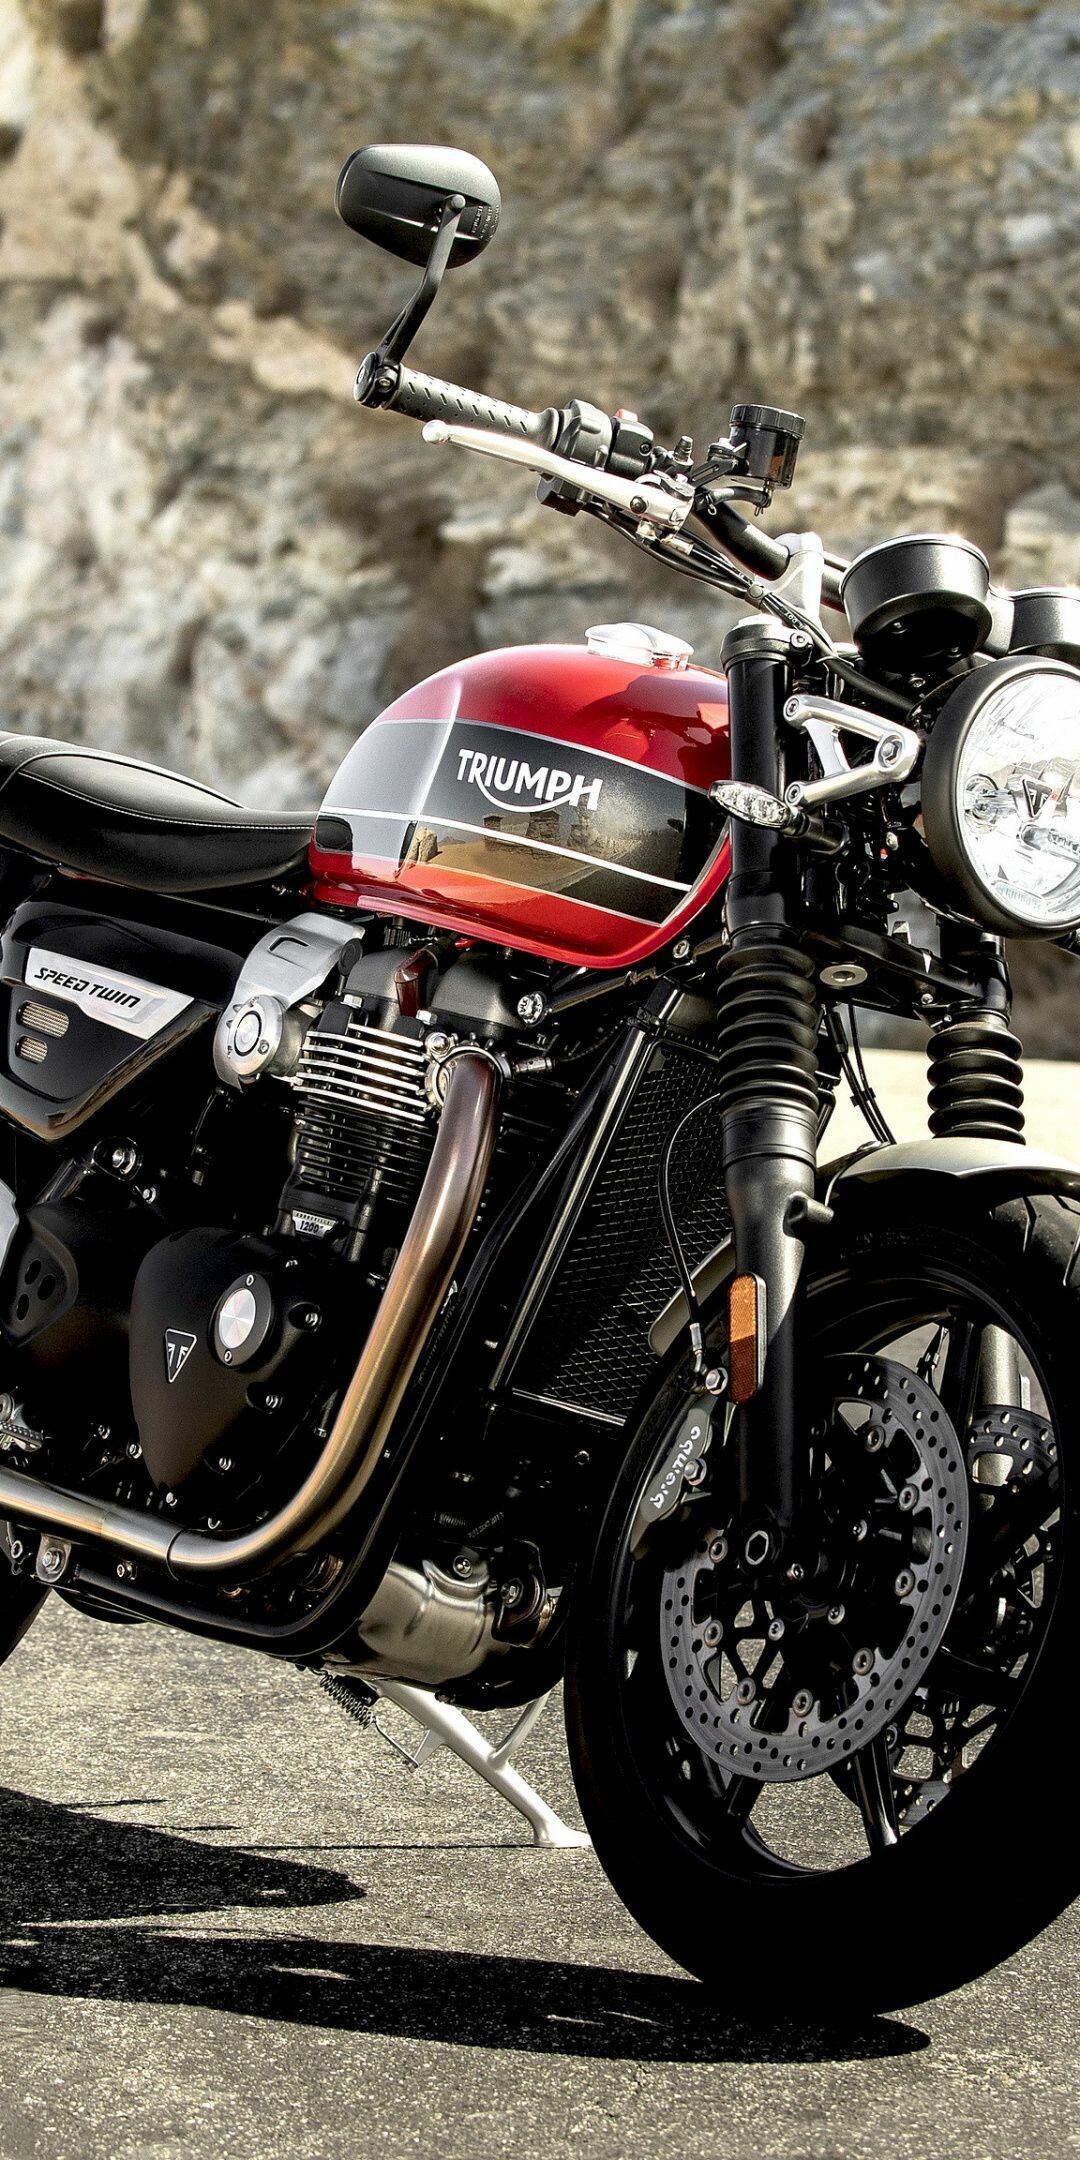 Triumph Motorcycles: Well-known British motorcycle manufacturer, Motor vehicle. 1080x2160 HD Wallpaper.